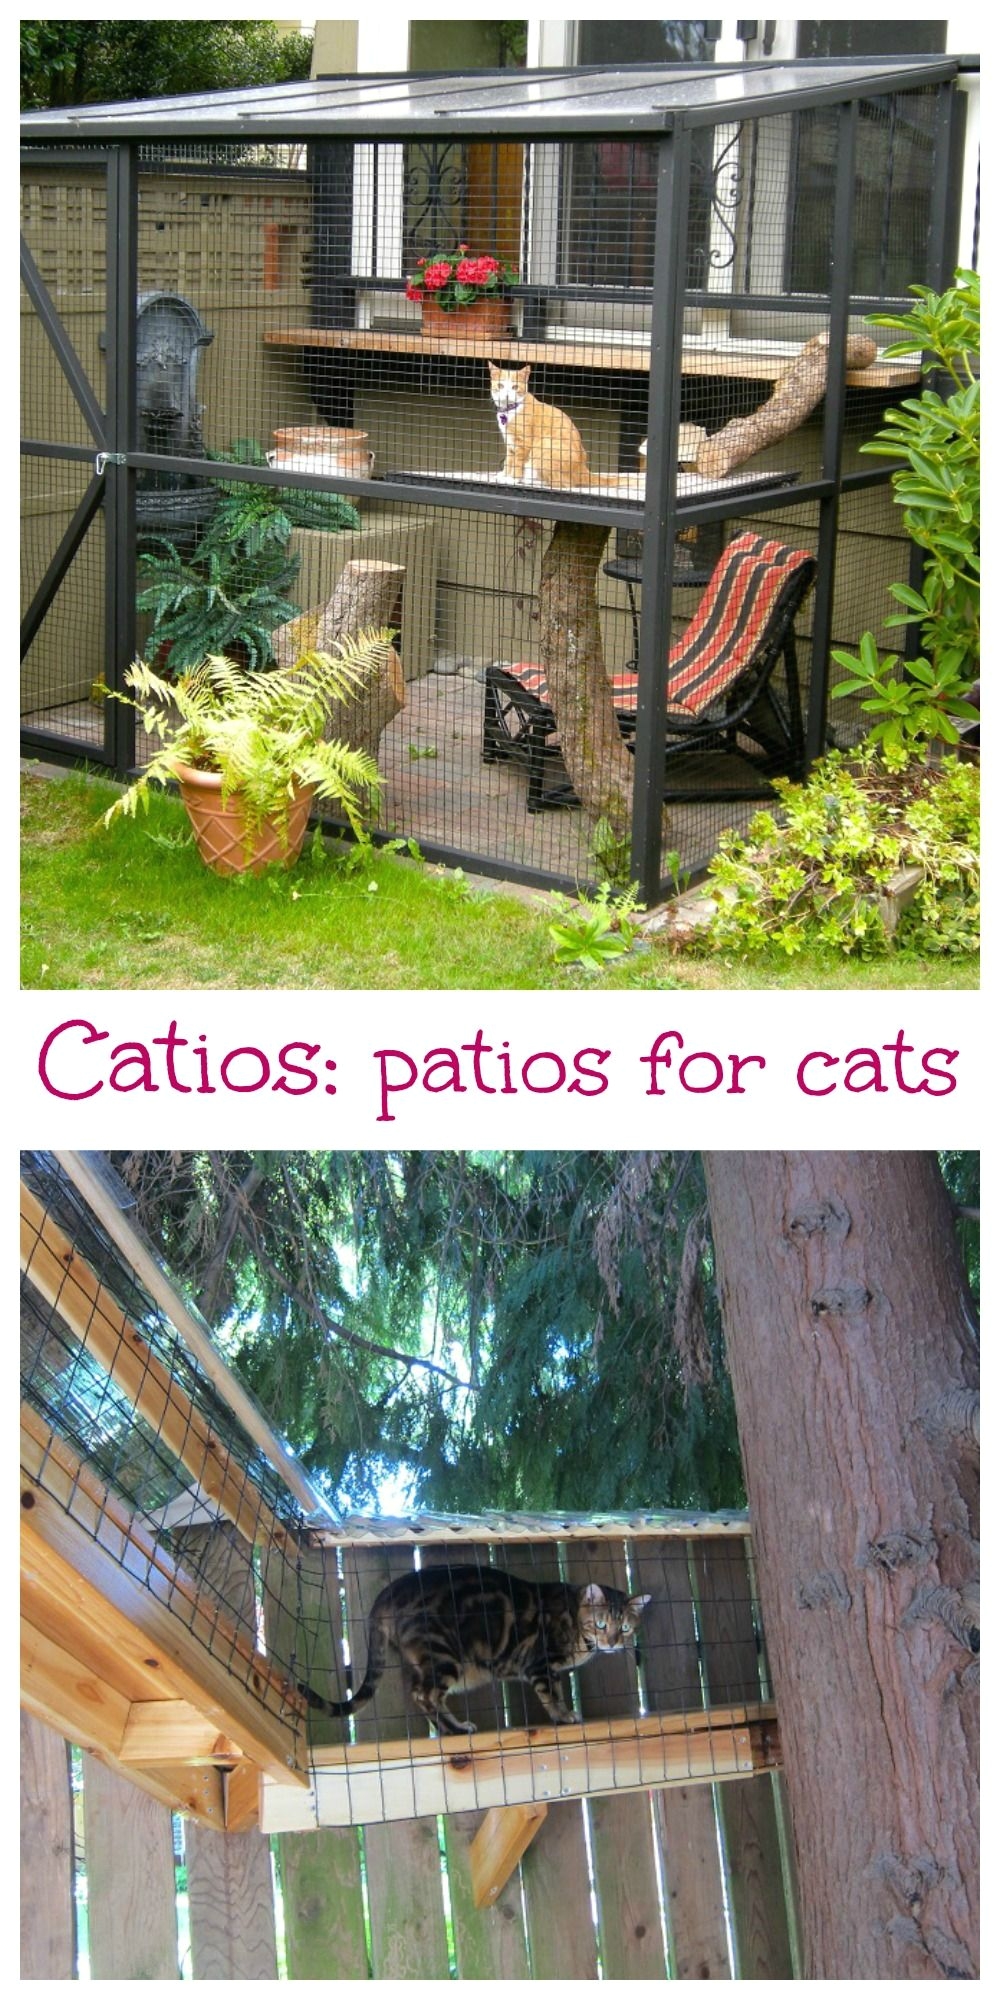 there s a new trend since she sheds for outdoor decorating catios a patio for your cat these enclosed cages let your cats run around outside in your